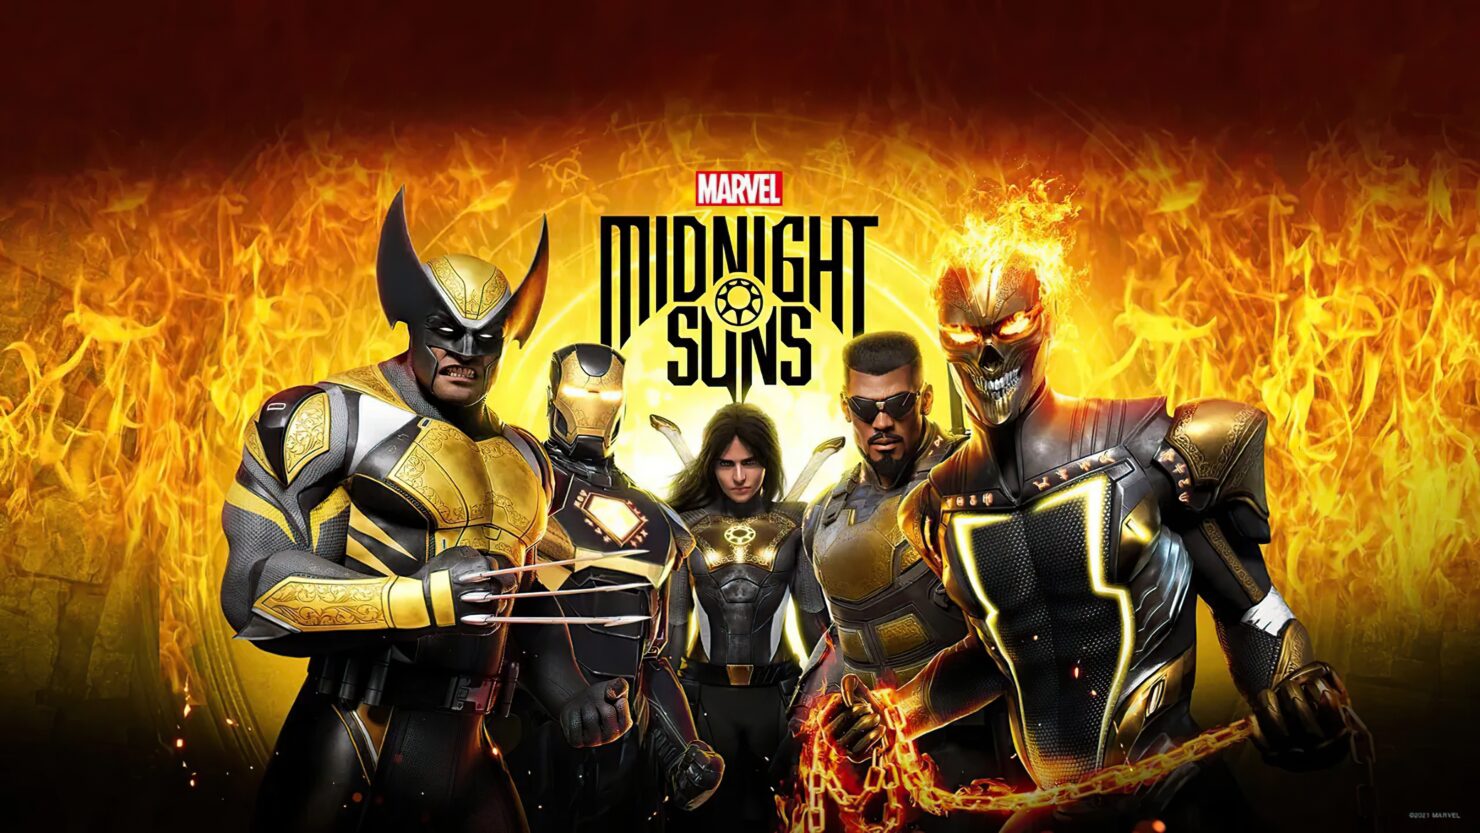 Marvel's Midnight Sun will be released on October 7. There is a new trailer.